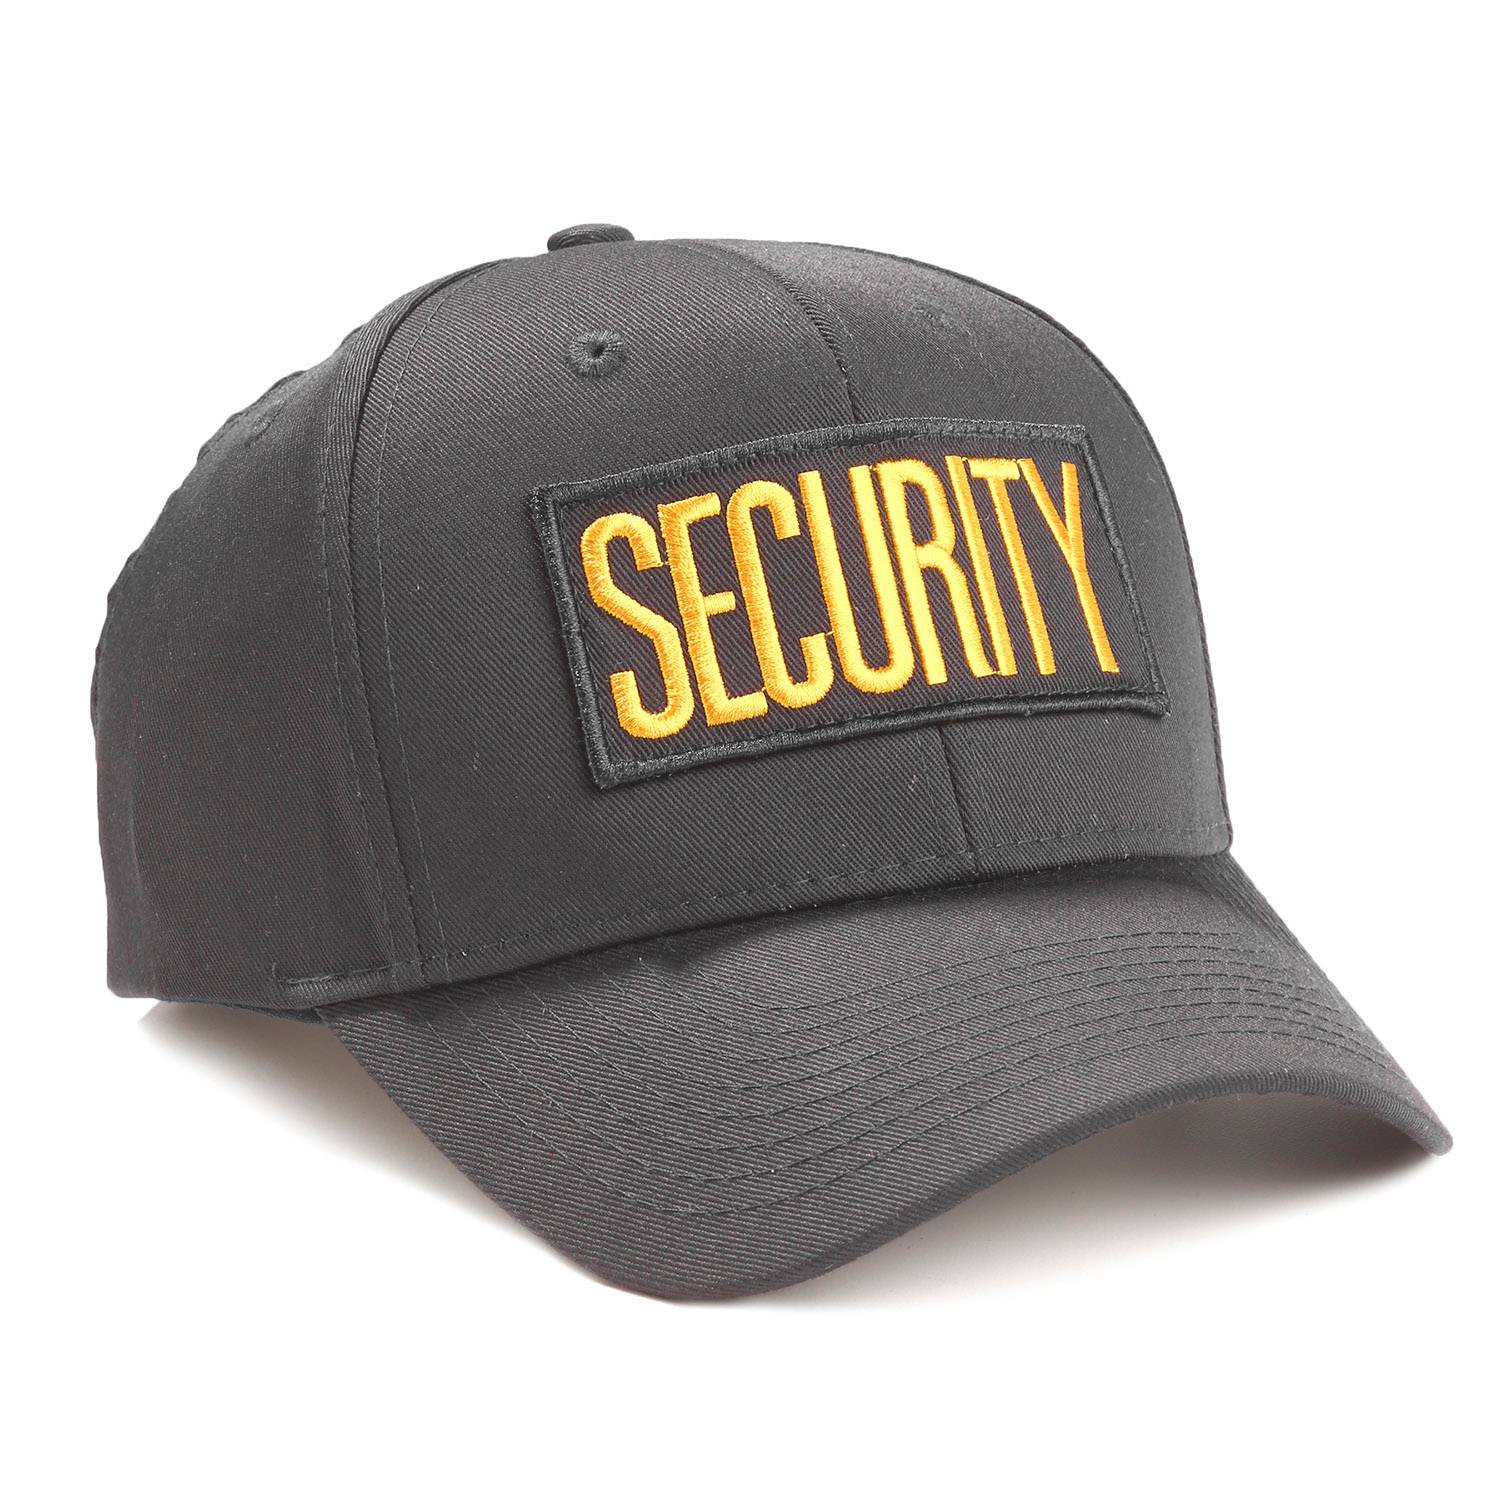 LAWPRO WINTER WEIGHT CAP WITH SECURITY